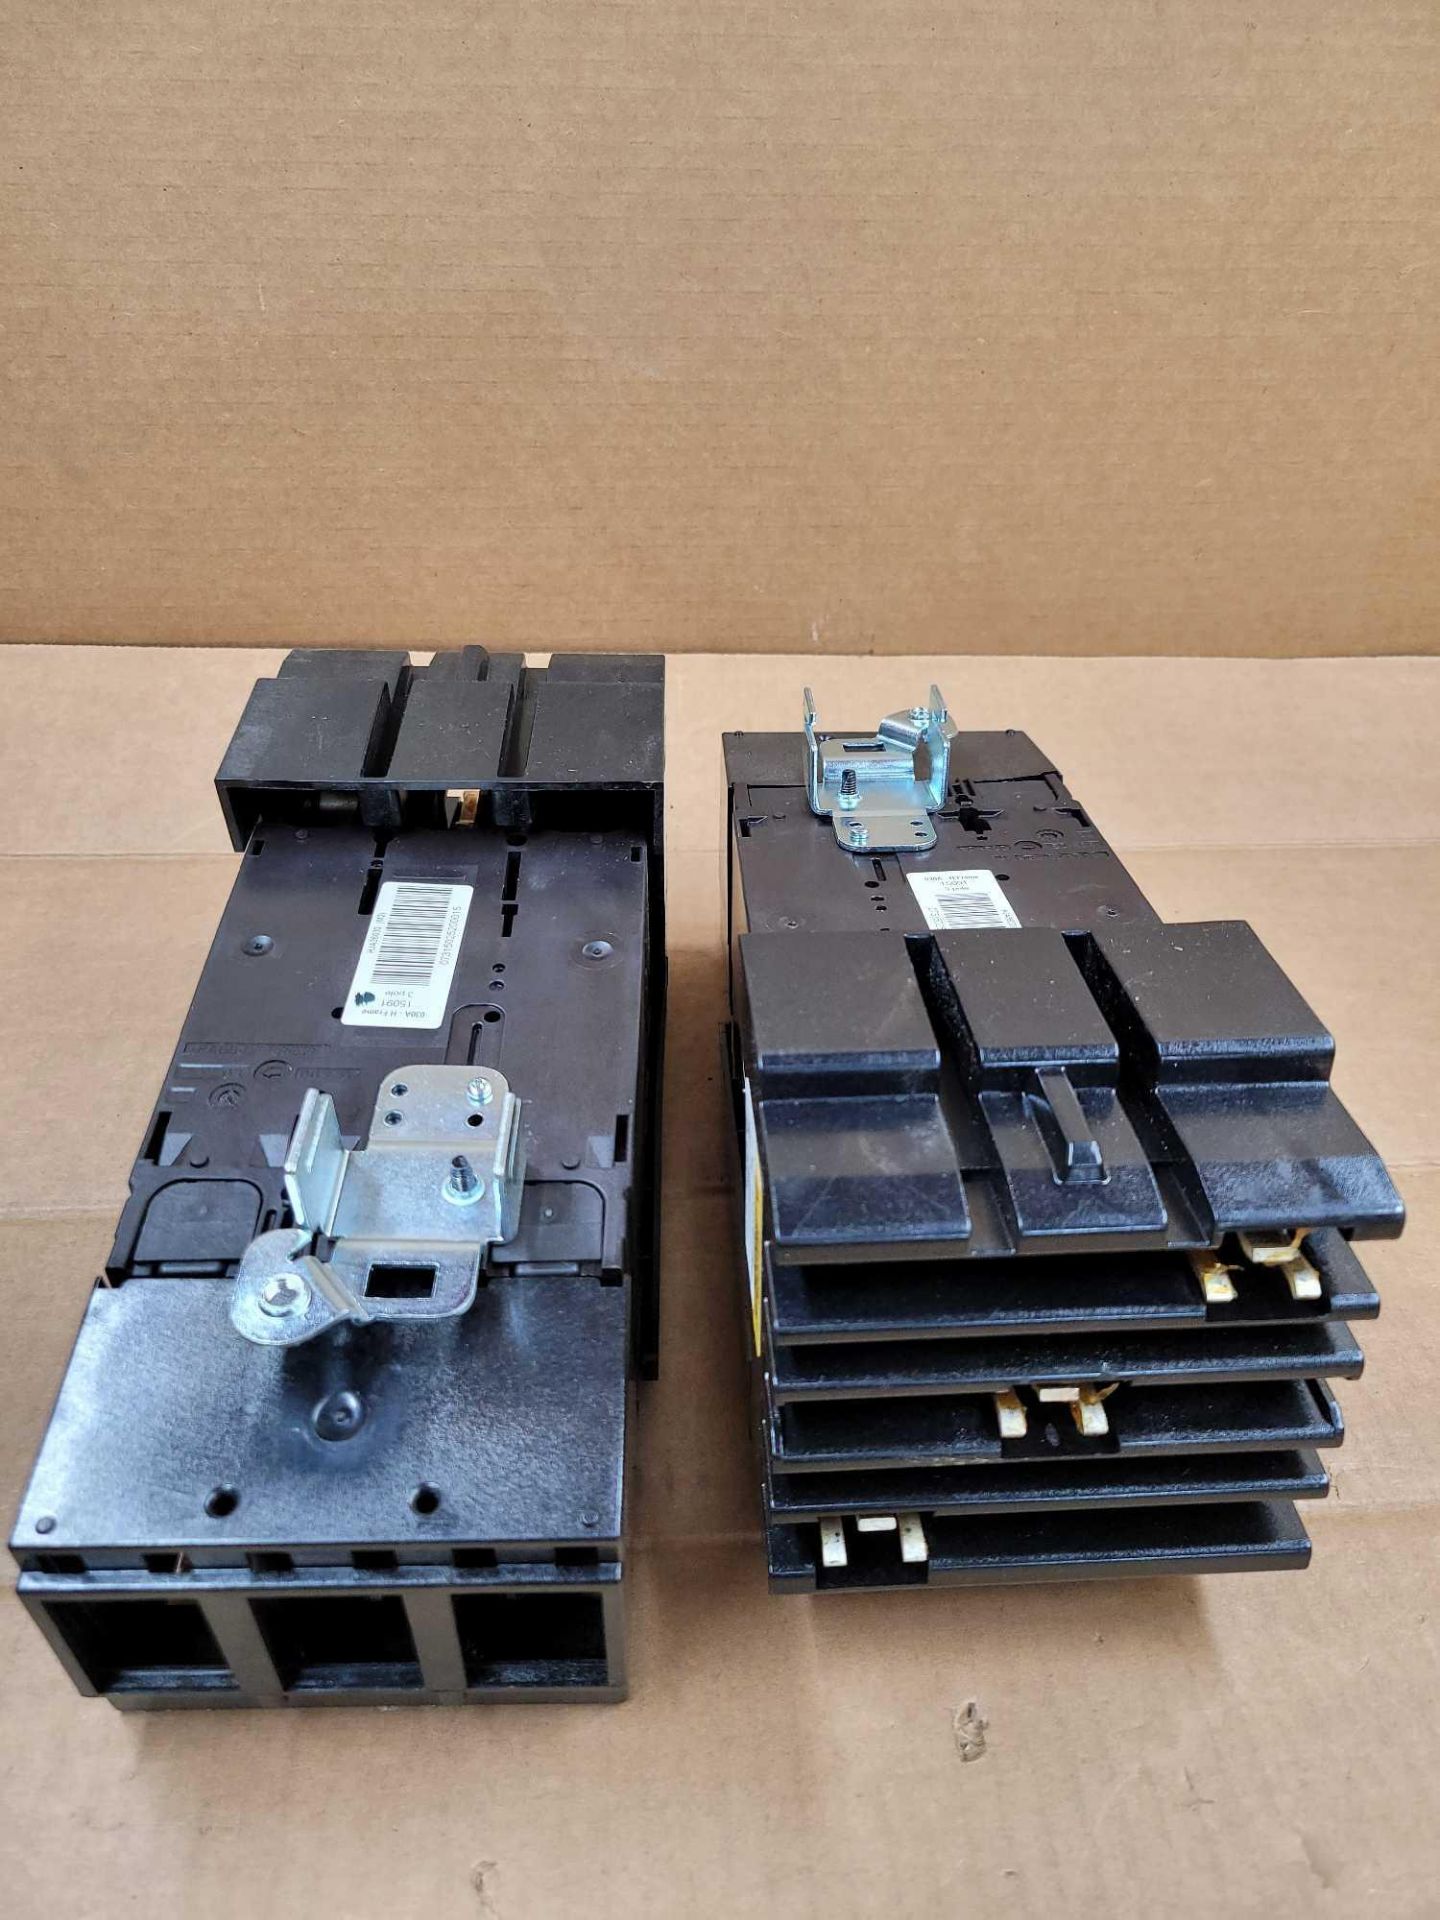 LOT OF 2 SQUARE D HJA36030 / 30 Amp Molded Case Circuit Breaker  /  Lot Weight: 9.8 lbs - Image 6 of 6